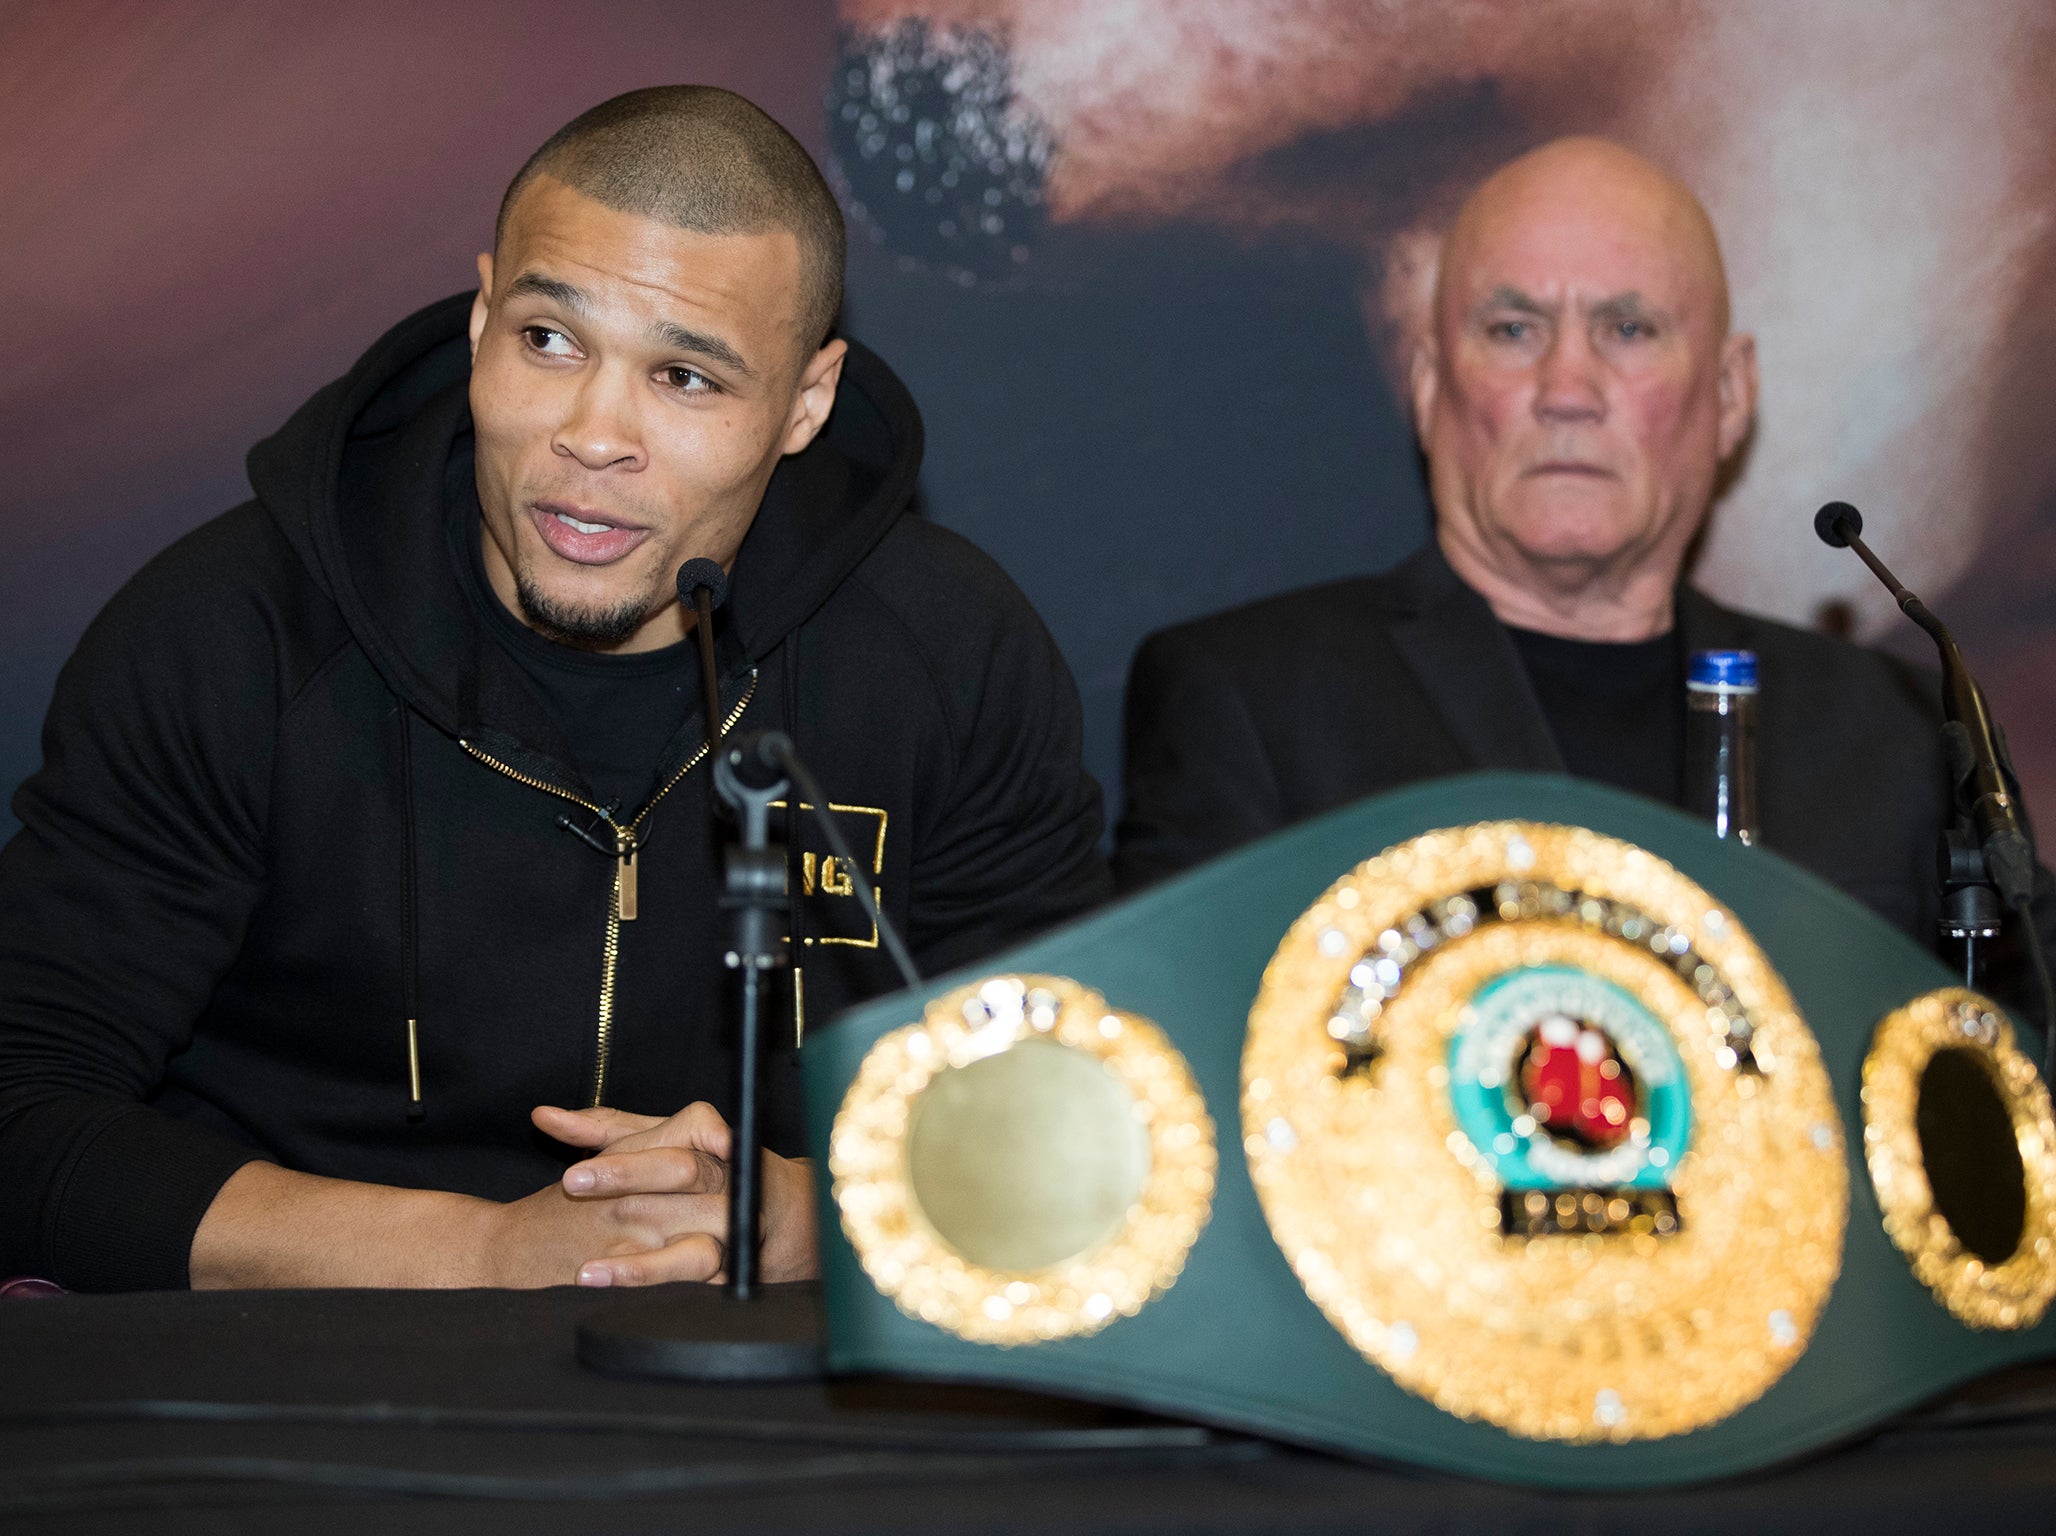 Eubank Jr sat next to his long-time trainer, Ronnie Davies